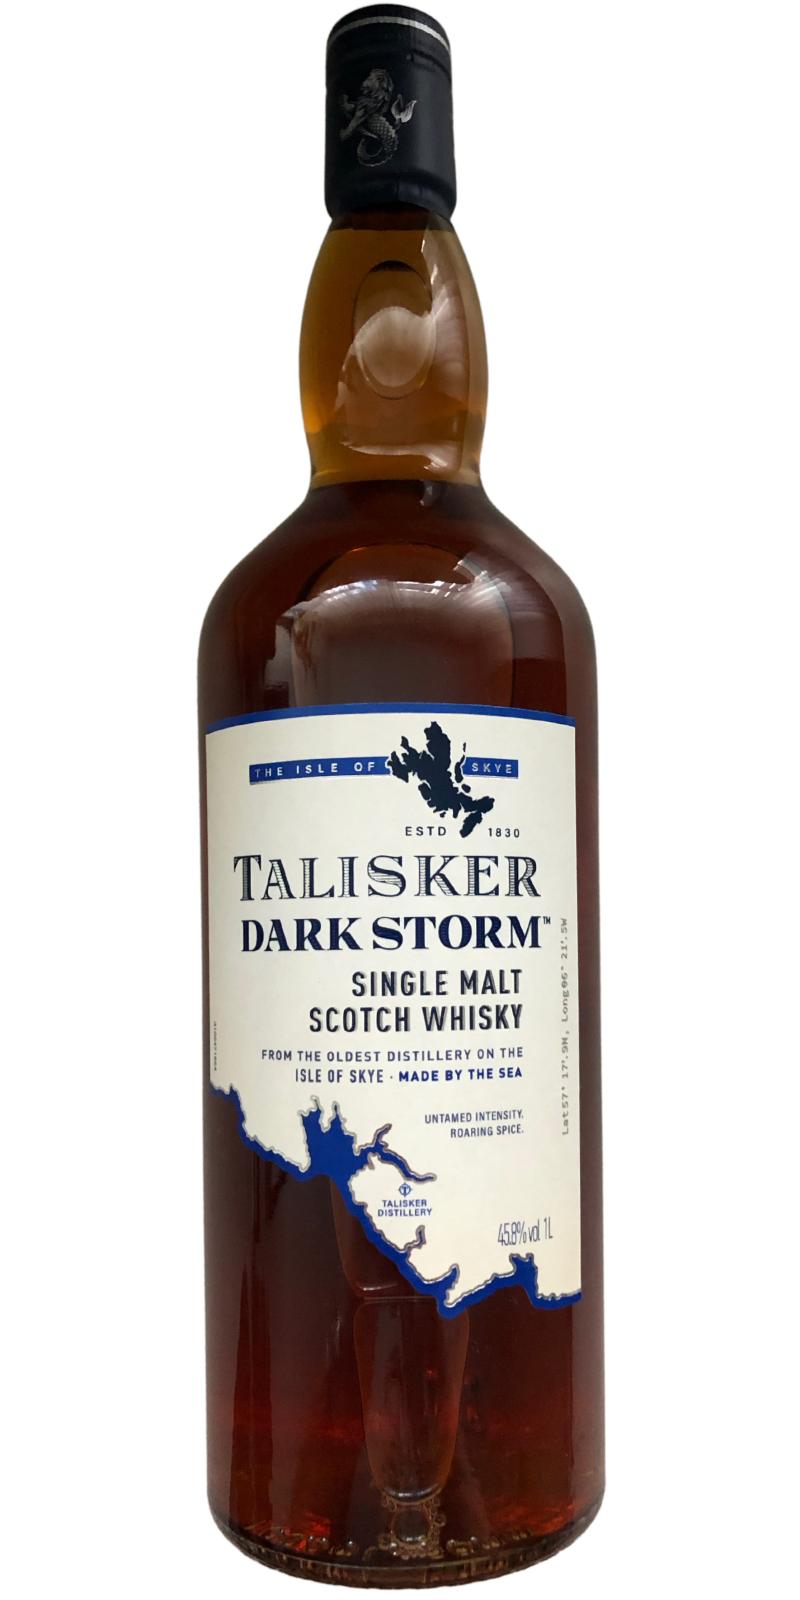 Talisker Dark Storm From the Oldest Distillery on the Isle of Skye Heavily Charred Ex-Bourbon Travel Retail Exclusive 45.8% 1000ml